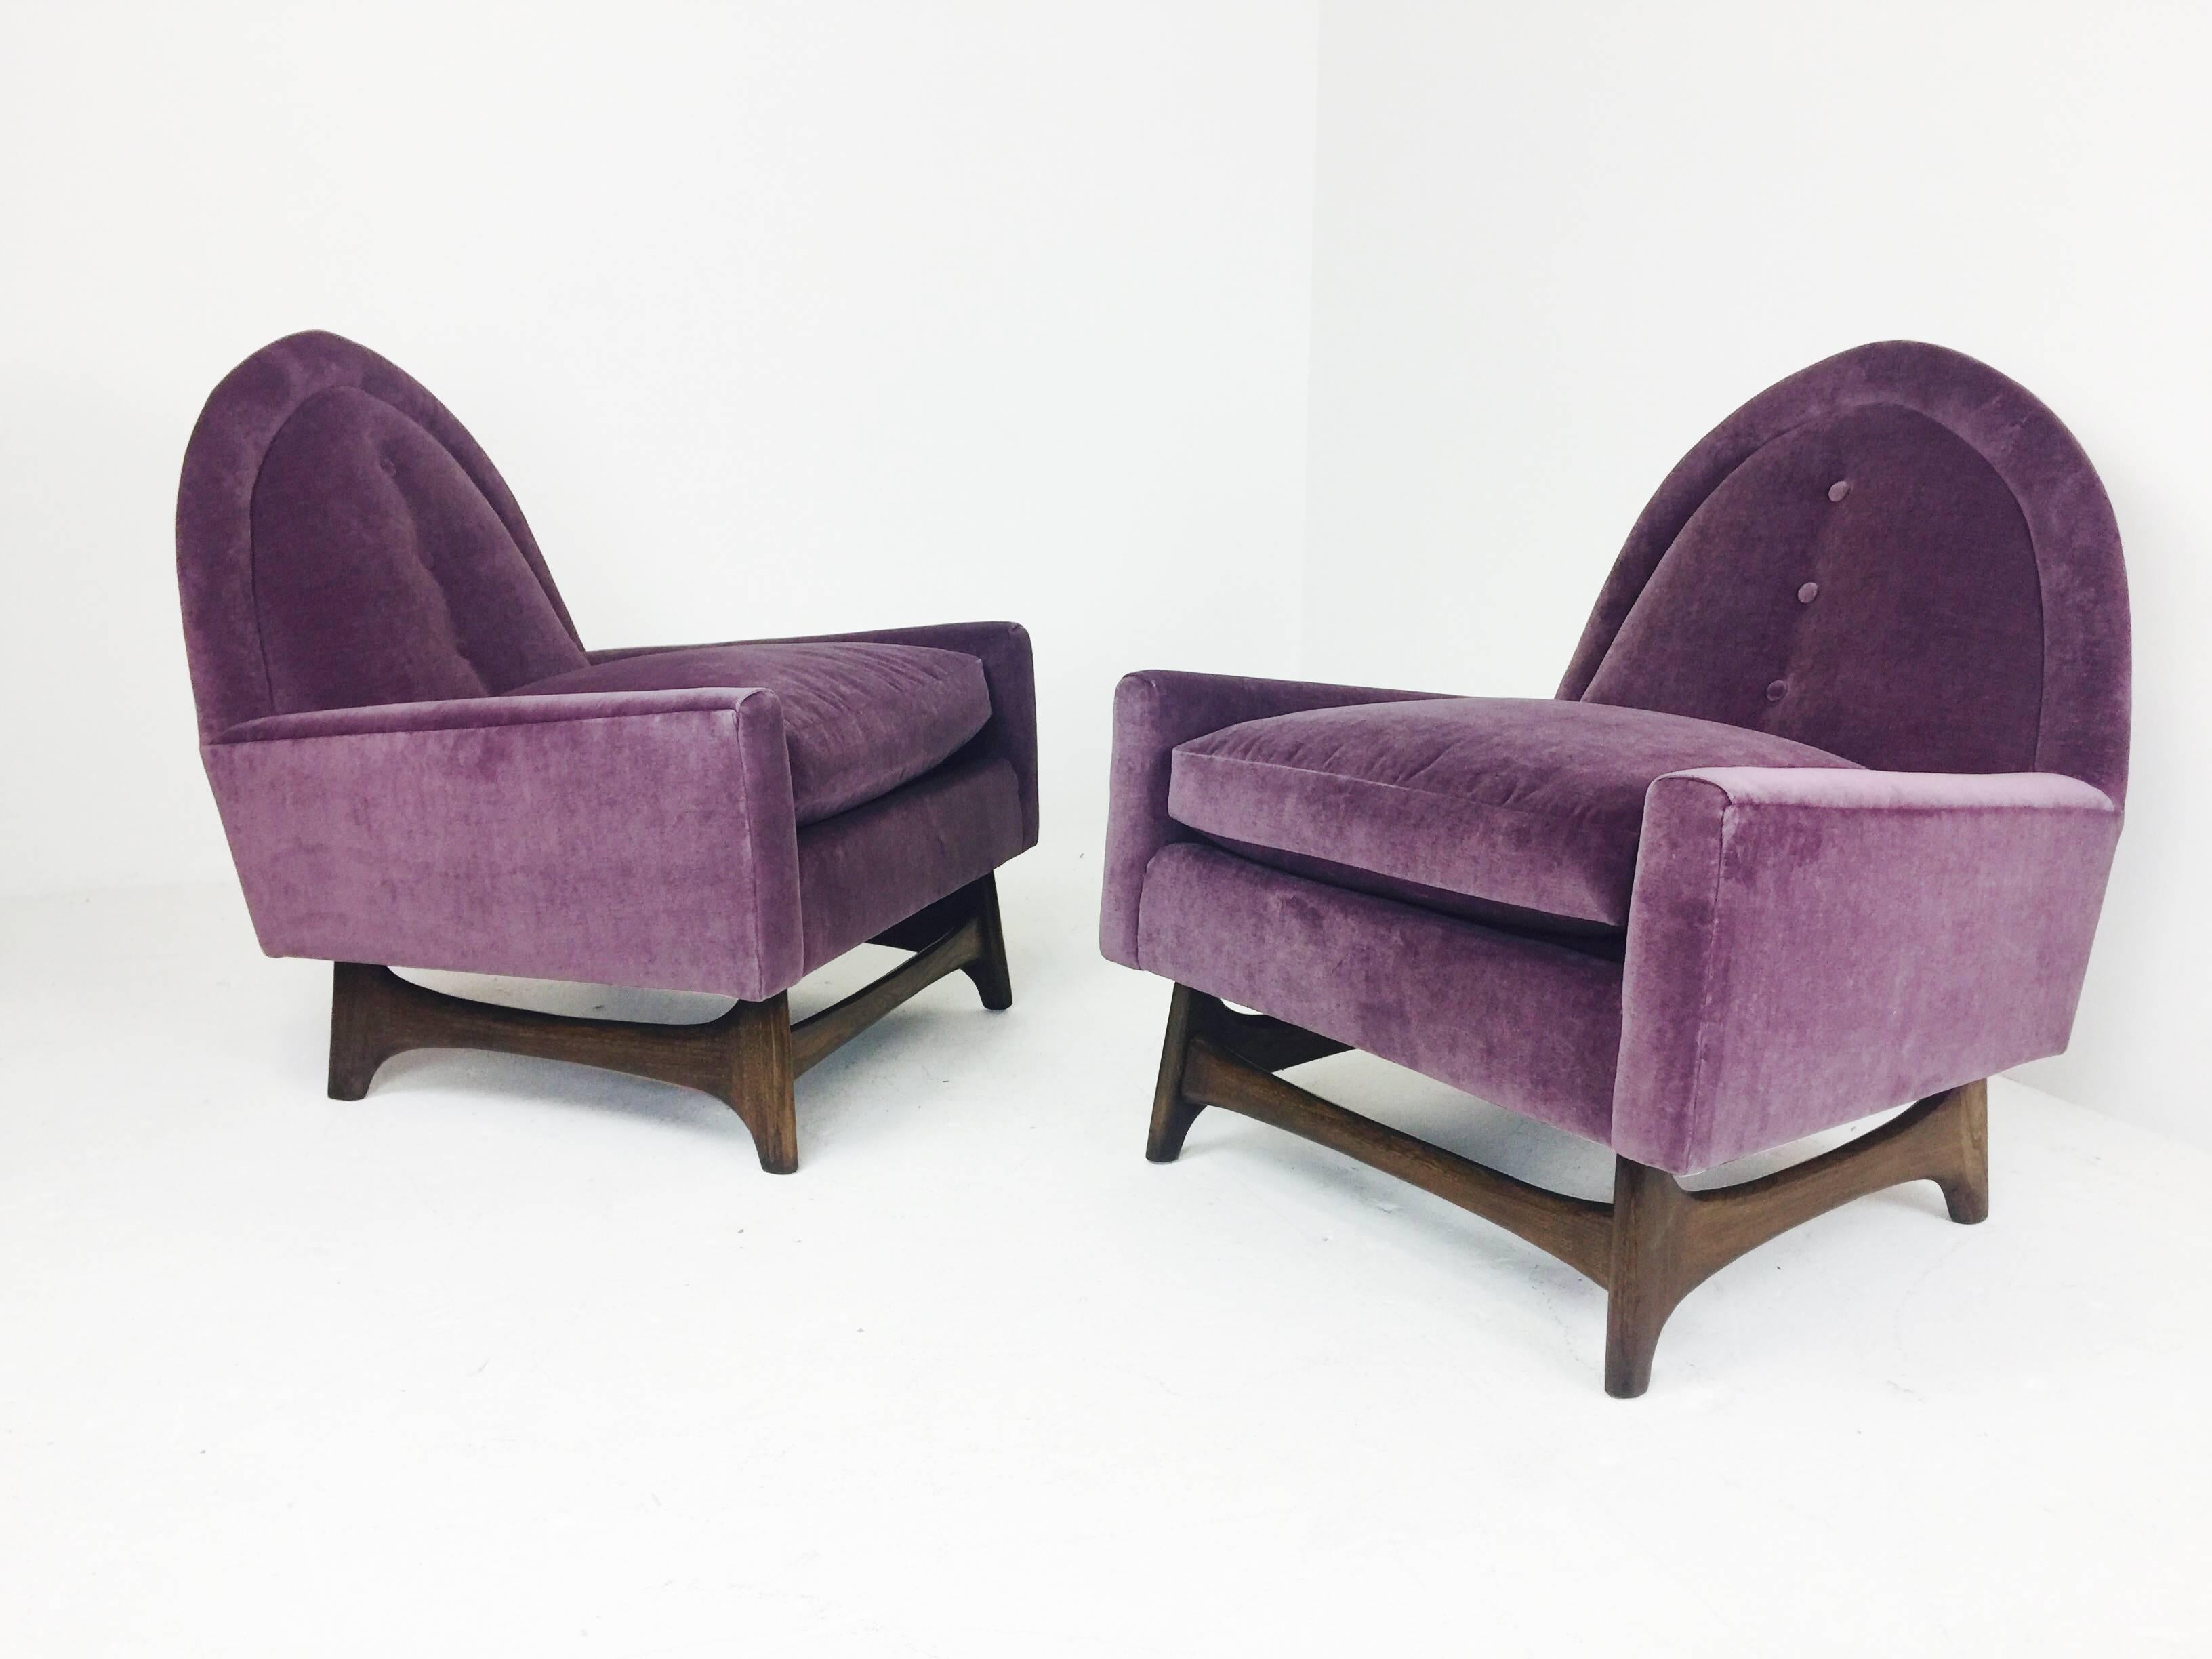 Pair of newly upholstered lounge chairs in purple velvet in the style of Adrain Pearsall, circa 1960s.

Dimensions: 28